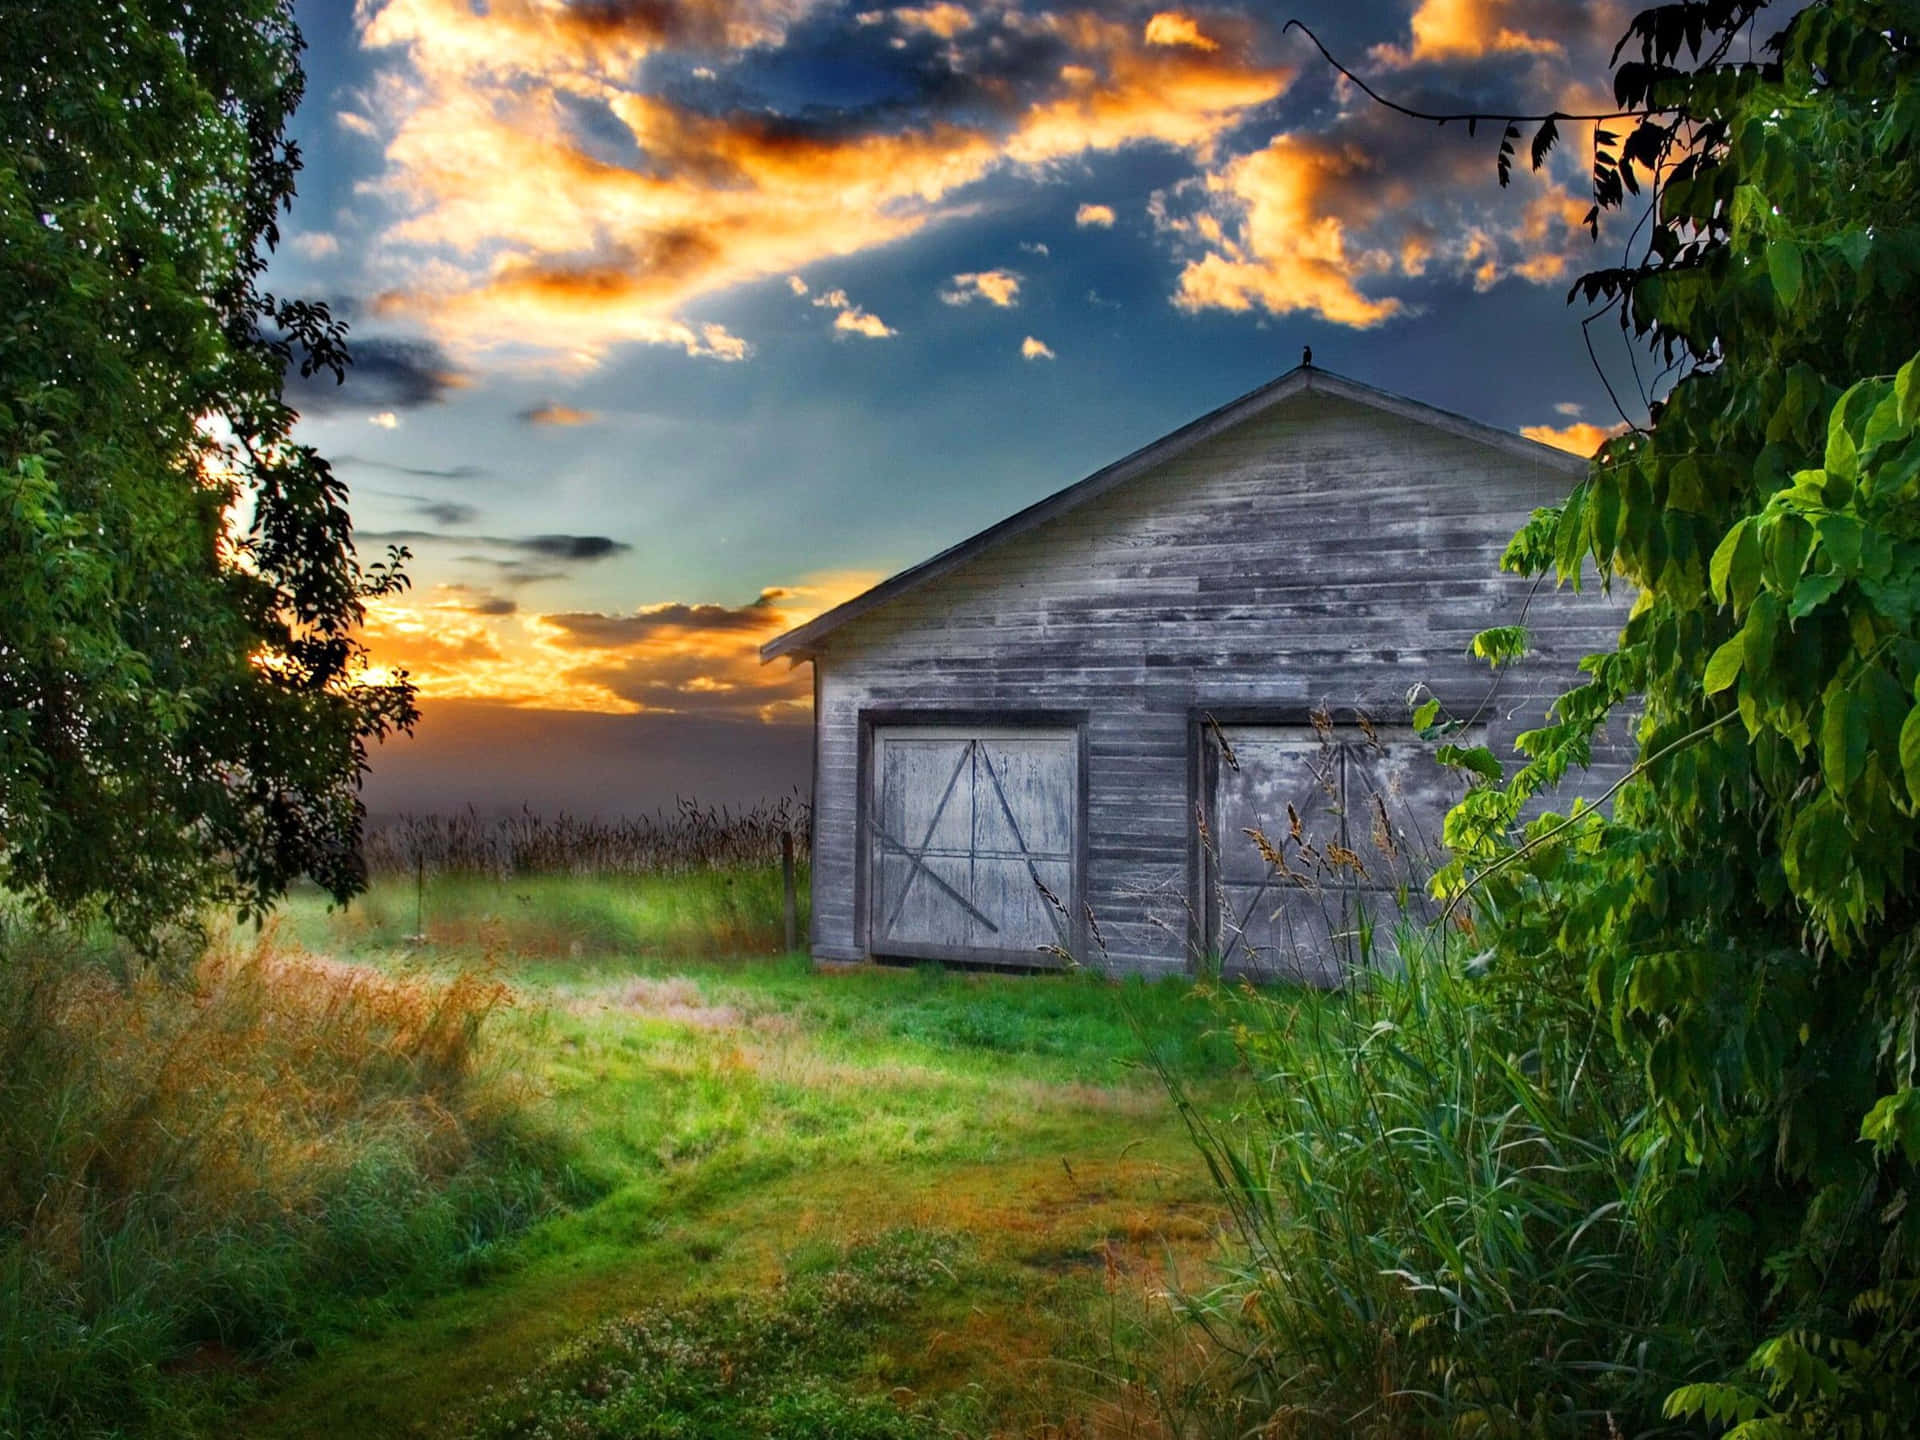 Rustic Charm - A View of a Barn at Sunrise